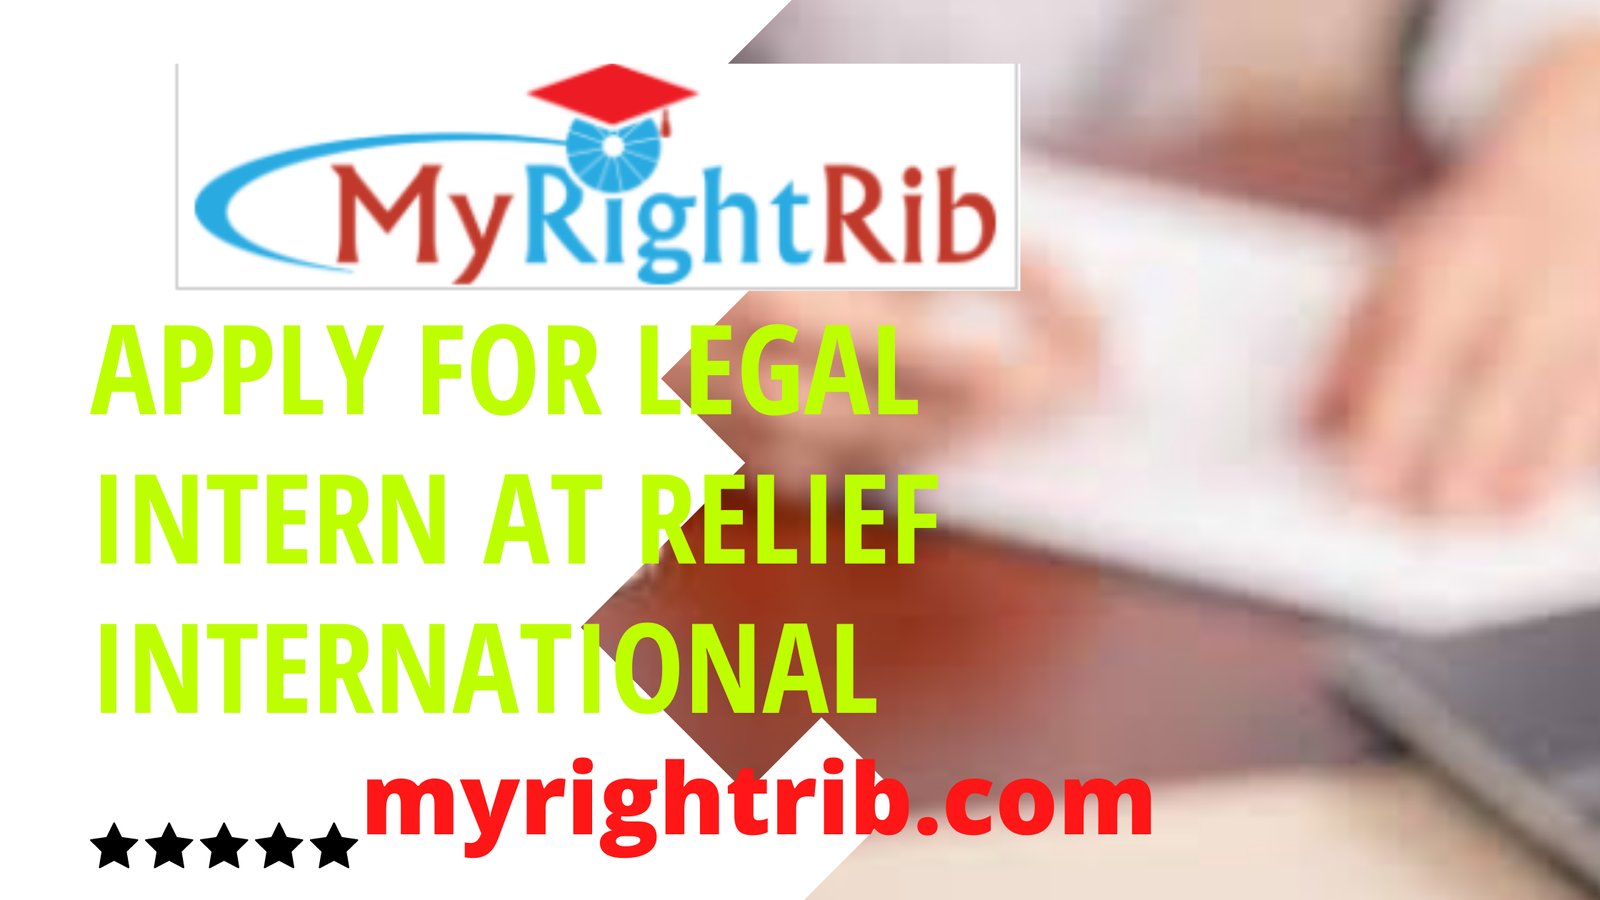 APPLY FOR LEGAL INTERN AT RELIEF INTERNATIONAL